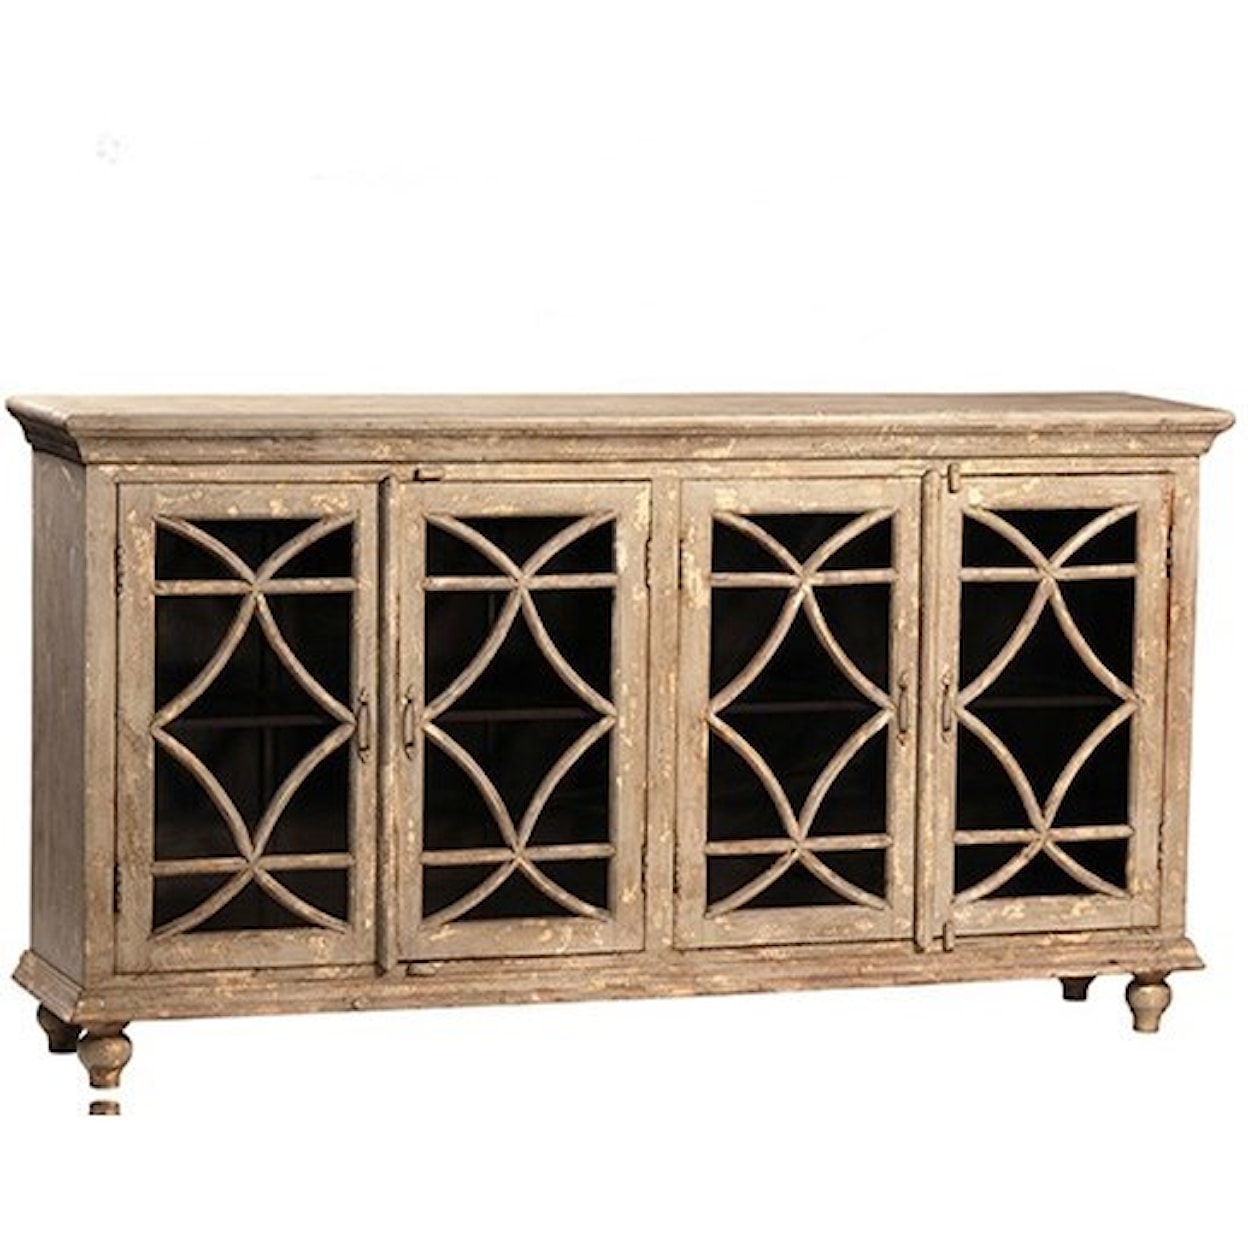 Dovetail Furniture Sideboards/Buffets Bacca Sideboard